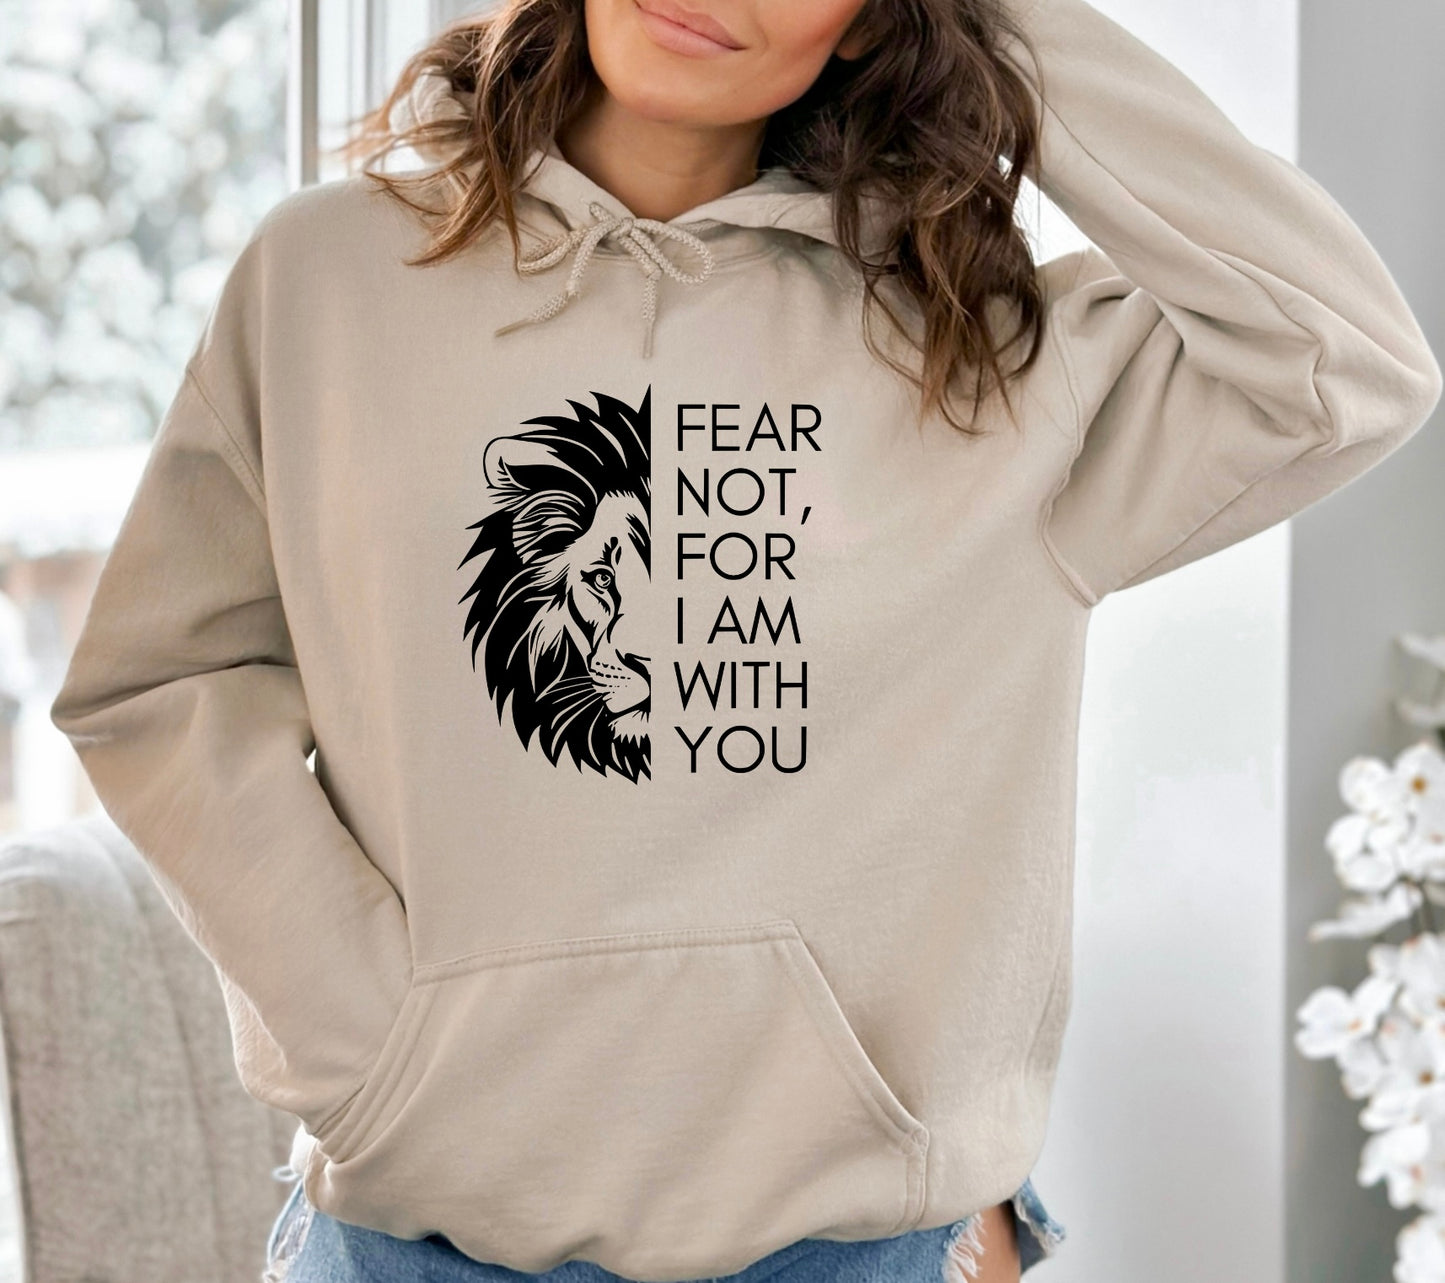 Fear Not For I Am With You Shirt, Christian Sweater, Catholic Hoodie, Religious Tee, Bible quote, Jesus shirt, Godly Gift